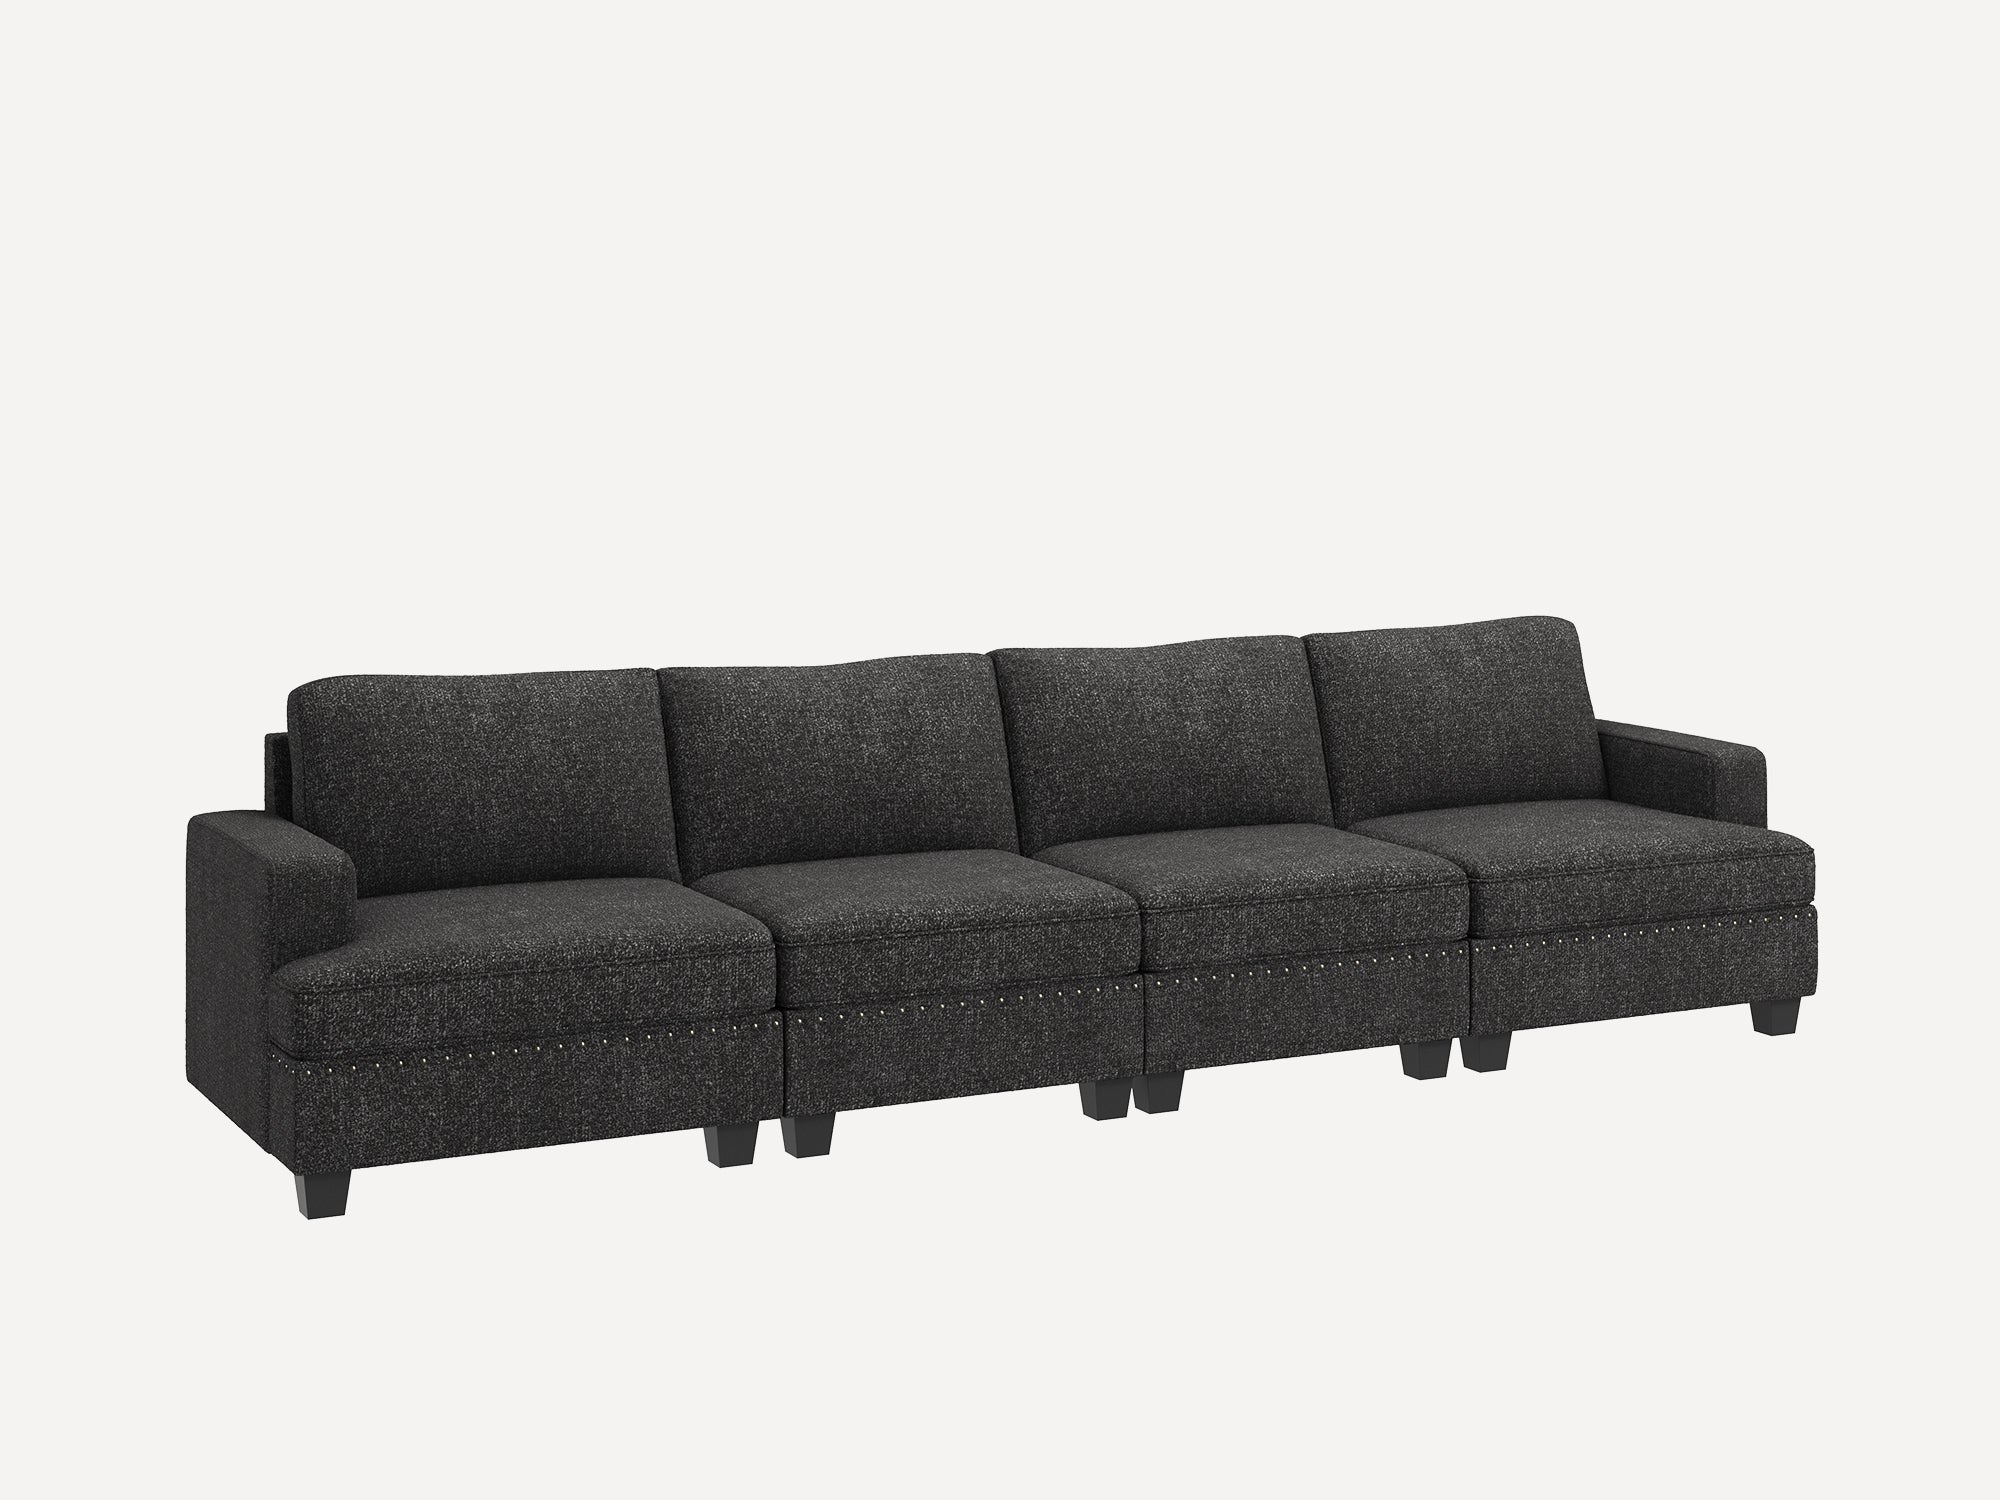 NOLANY 4-Seat Corner Modular Sofa Oversized Sectional Couch for Living Room #Color_Dark Grey